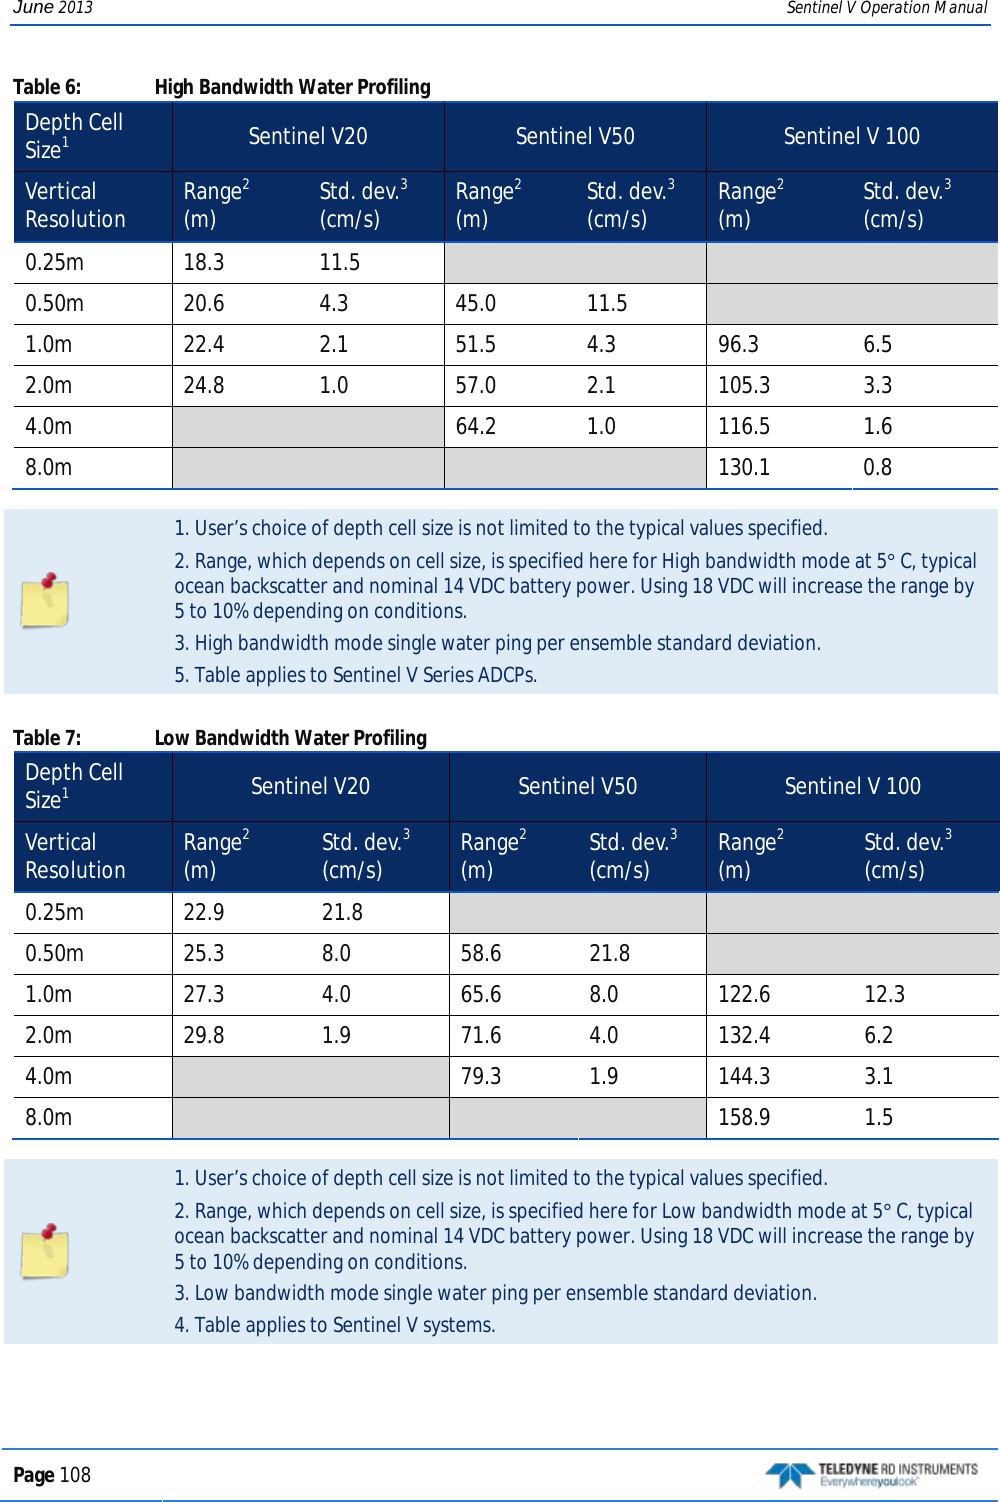 June 2013 Sentinel V Operation Manual Table 6:  High Bandwidth Water Profiling Depth Cell Size1 Sentinel V20 Sentinel V50 Sentinel V 100 Vertical  Resolution Range2 (m) Std. dev.3 (cm/s) Range2 (m) Std. dev.3 (cm/s) Range2 (m) Std. dev.3 (cm/s) 0.25m 18.3 11.5         0.50m 20.6 4.3 45.0 11.5     1.0m 22.4 2.1 51.5 4.3 96.3 6.5 2.0m 24.8 1.0 57.0 2.1 105.3 3.3 4.0m   64.2 1.0 116.5 1.6 8.0m          130.1 0.8   1. User’s choice of depth cell size is not limited to the typical values specified. 2. Range, which depends on cell size, is specified here for High bandwidth mode at 5° C, typical ocean backscatter and nominal 14 VDC battery power. Using 18 VDC will increase the range by 5 to 10% depending on conditions. 3. High bandwidth mode single water ping per ensemble standard deviation. 5. Table applies to Sentinel V Series ADCPs.  Table 7:  Low Bandwidth Water Profiling Depth Cell Size1 Sentinel V20 Sentinel V50 Sentinel V 100 Vertical  Resolution Range2 (m) Std. dev.3 (cm/s) Range2 (m) Std. dev.3 (cm/s) Range2 (m) Std. dev.3 (cm/s) 0.25m 22.9 21.8         0.50m 25.3 8.0 58.6 21.8     1.0m 27.3 4.0 65.6 8.0 122.6 12.3 2.0m 29.8 1.9 71.6 4.0 132.4 6.2 4.0m   79.3 1.9 144.3 3.1 8.0m          158.9 1.5   1. User’s choice of depth cell size is not limited to the typical values specified. 2. Range, which depends on cell size, is specified here for Low bandwidth mode at 5° C, typical ocean backscatter and nominal 14 VDC battery power. Using 18 VDC will increase the range by 5 to 10% depending on conditions. 3. Low bandwidth mode single water ping per ensemble standard deviation. 4. Table applies to Sentinel V systems.  Page 108   